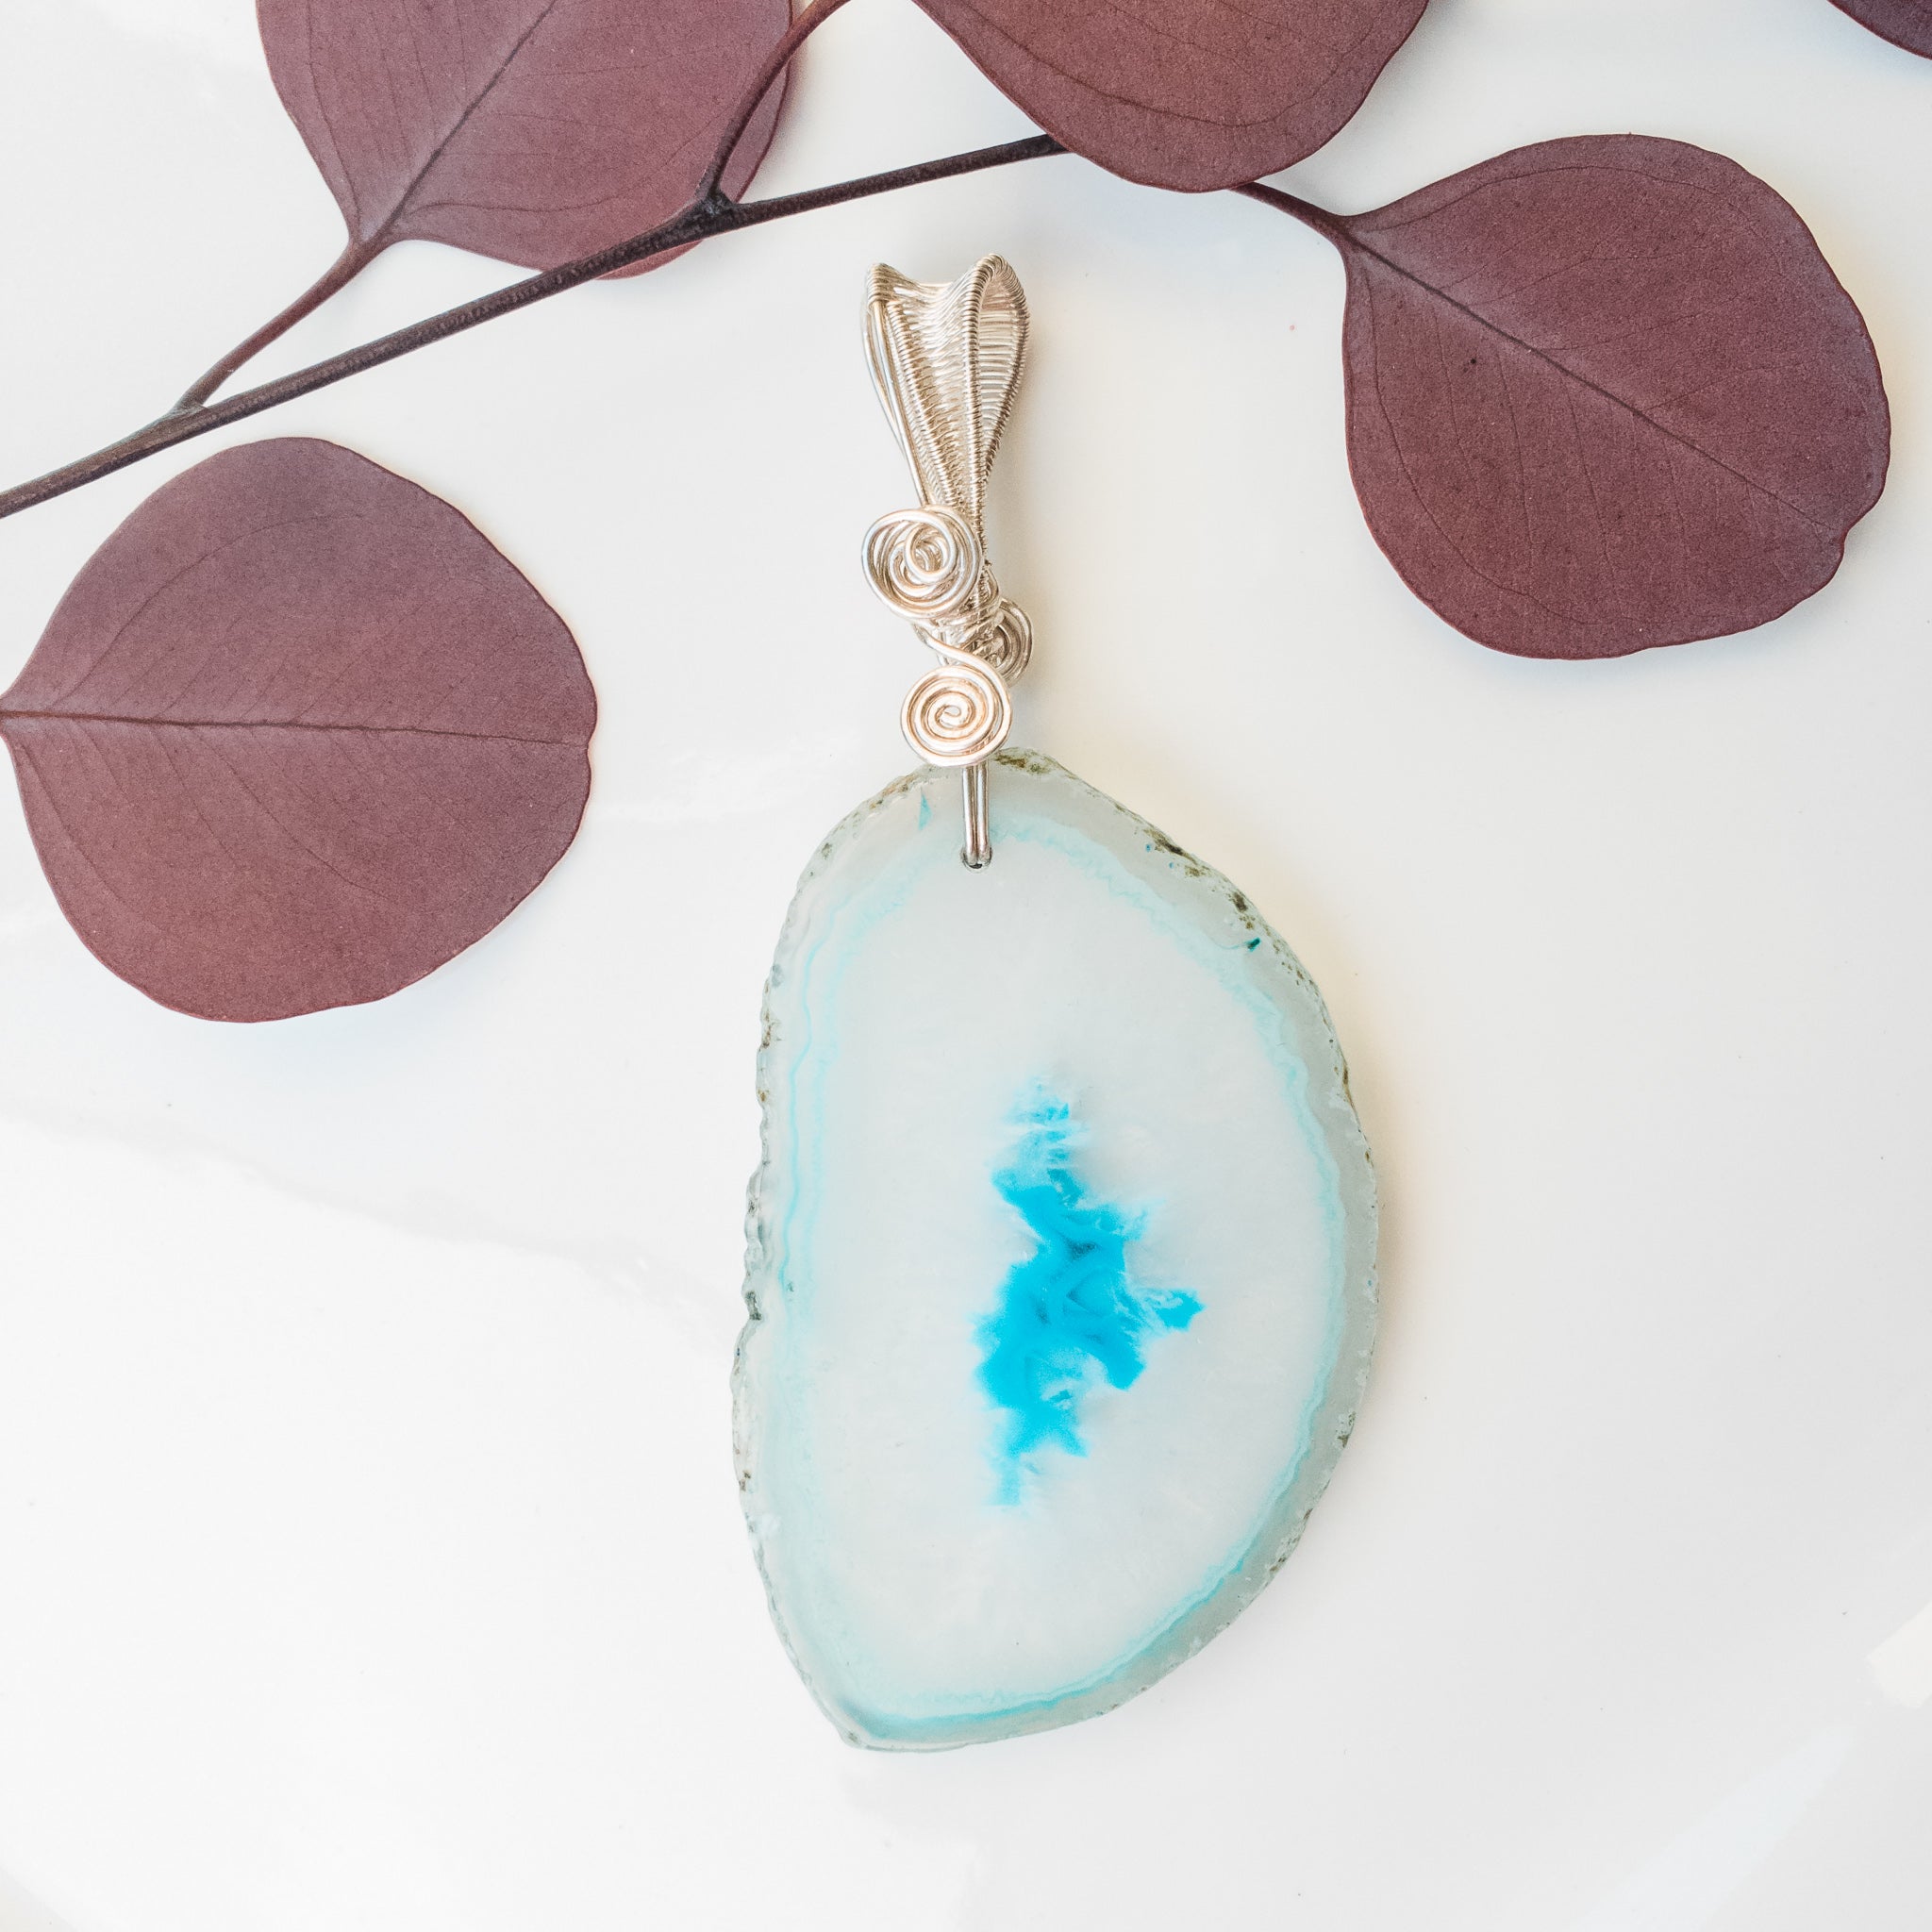 Rio Collection - Stunning Statement Aqua Blue Geode Pendant in Sterling Silver ~ One-of-a-Kind - close-up front view - BellaChel Jeweler